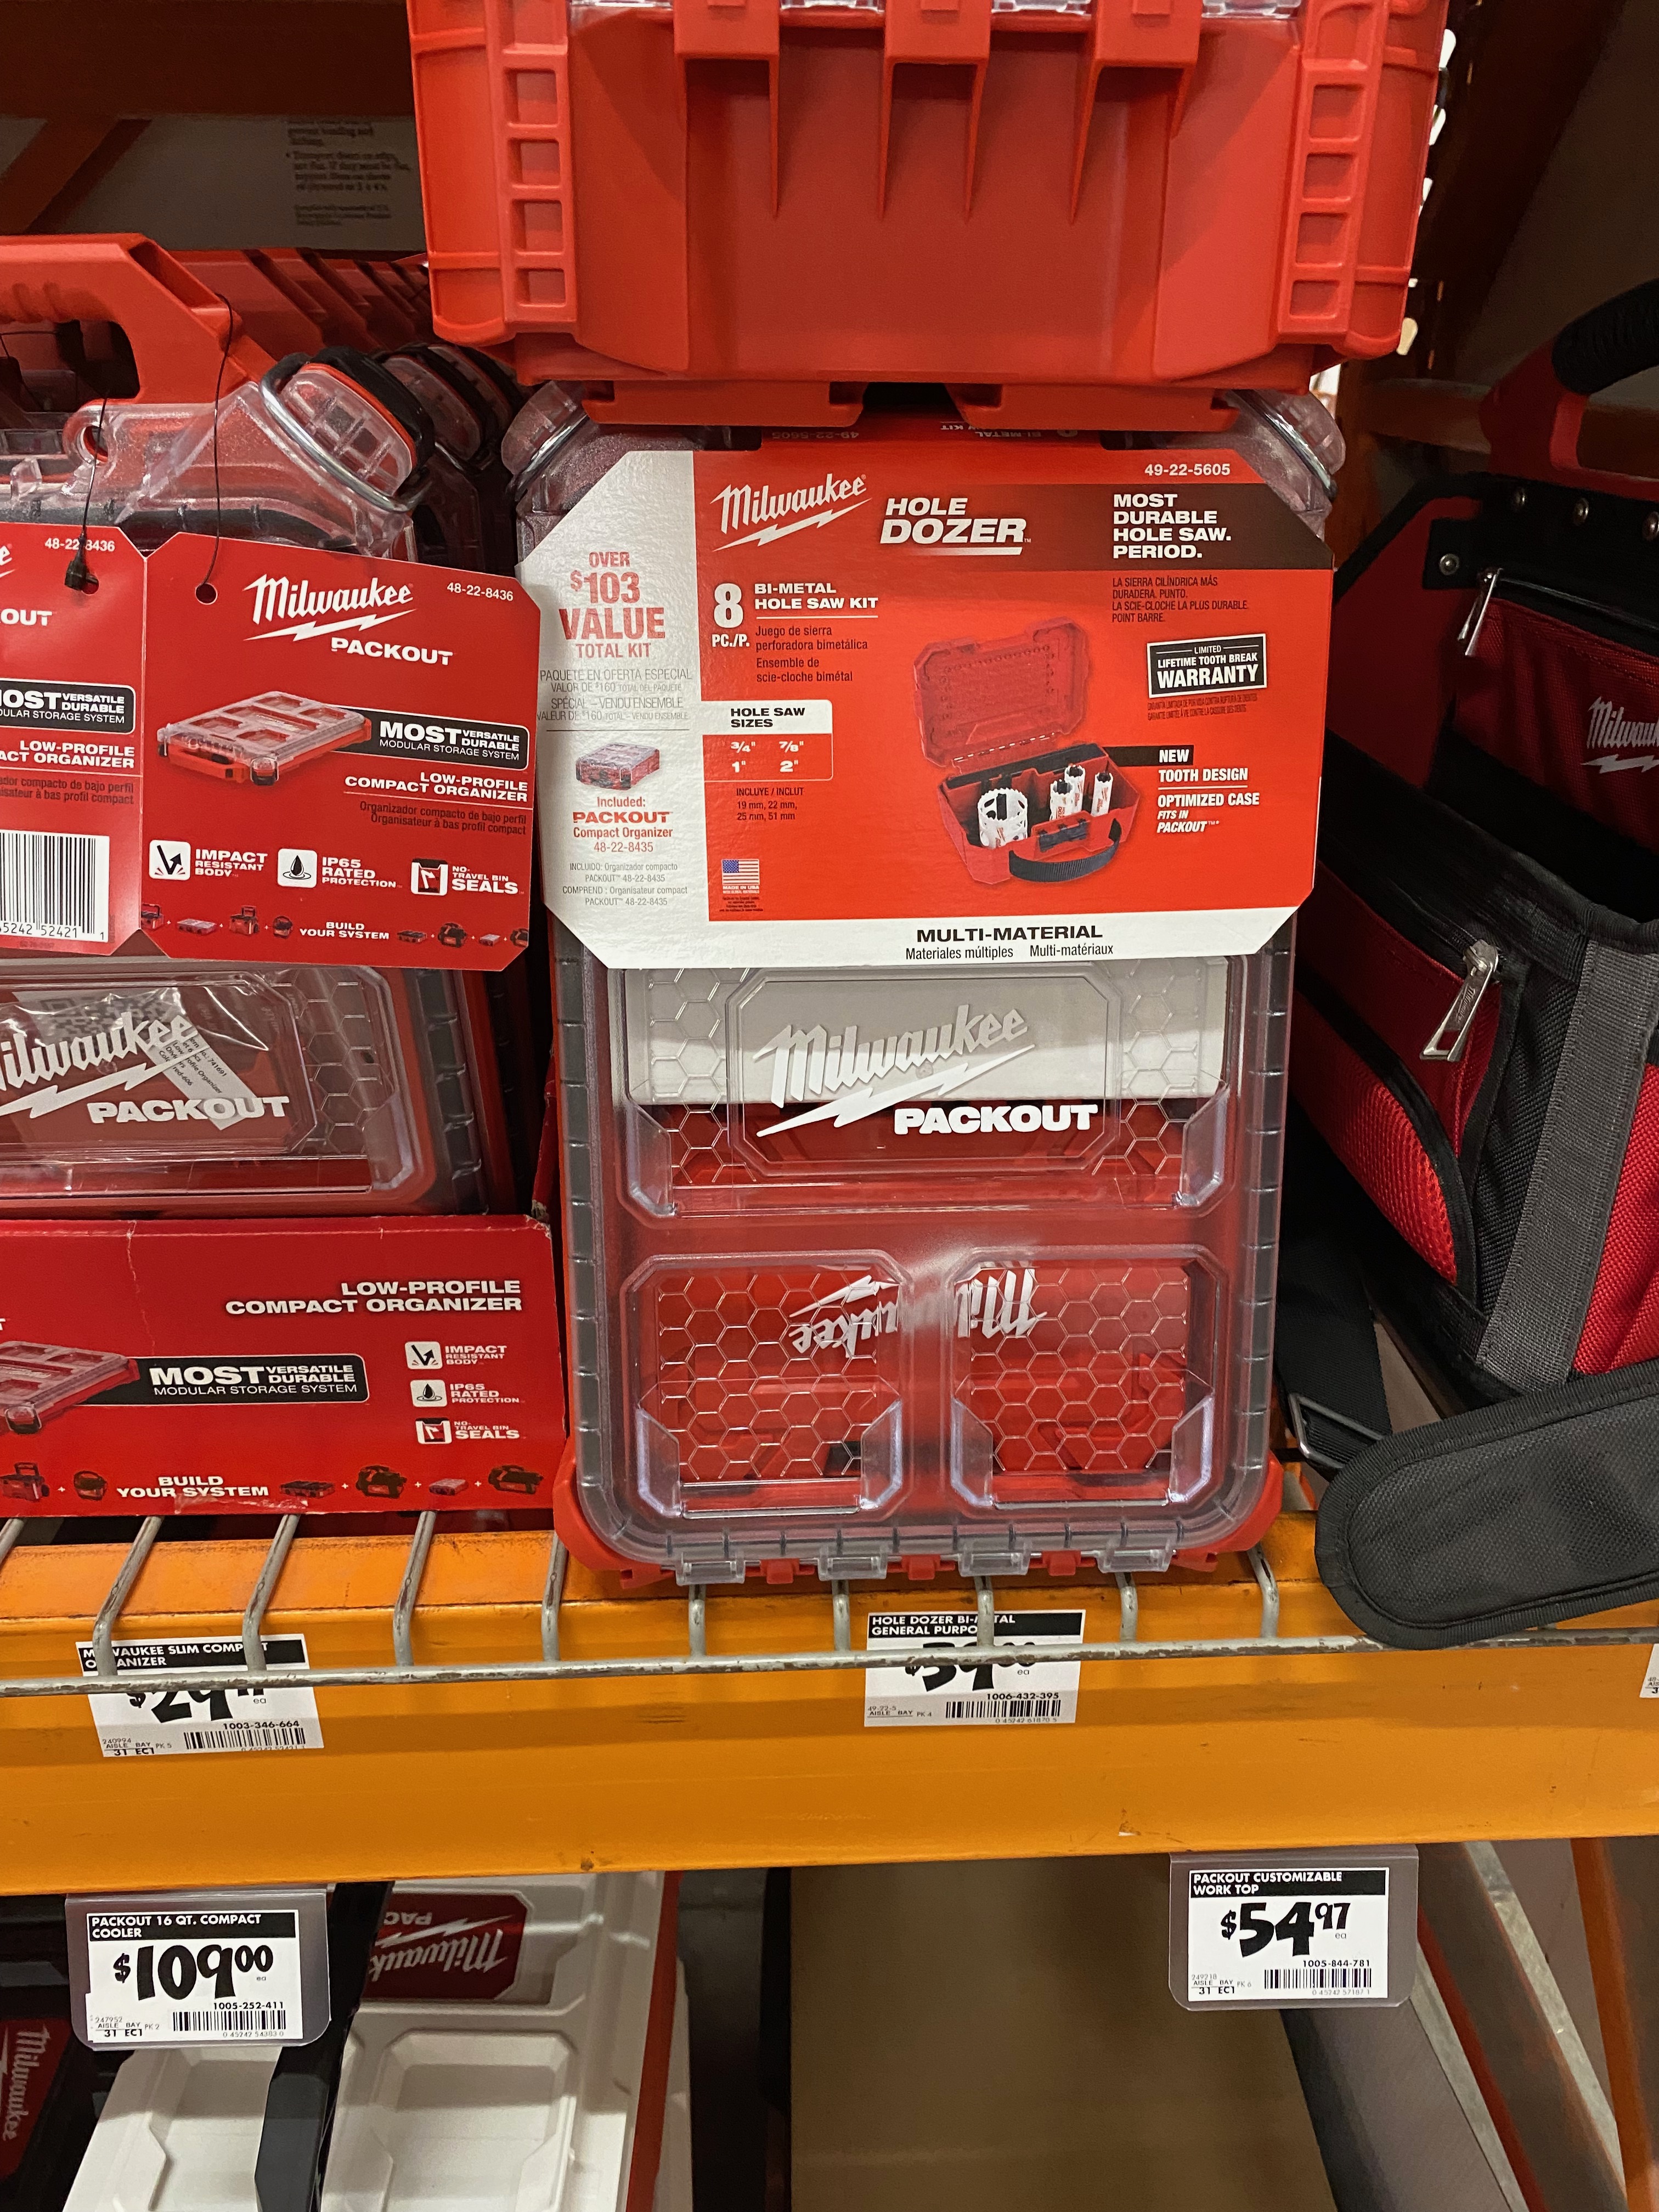 In Store Milwaukee Hole Dozer Bi-Metal General Purpose Hole Saw Set with PACKOUT Compact Organizer (8-Piece) YMMV $39.88